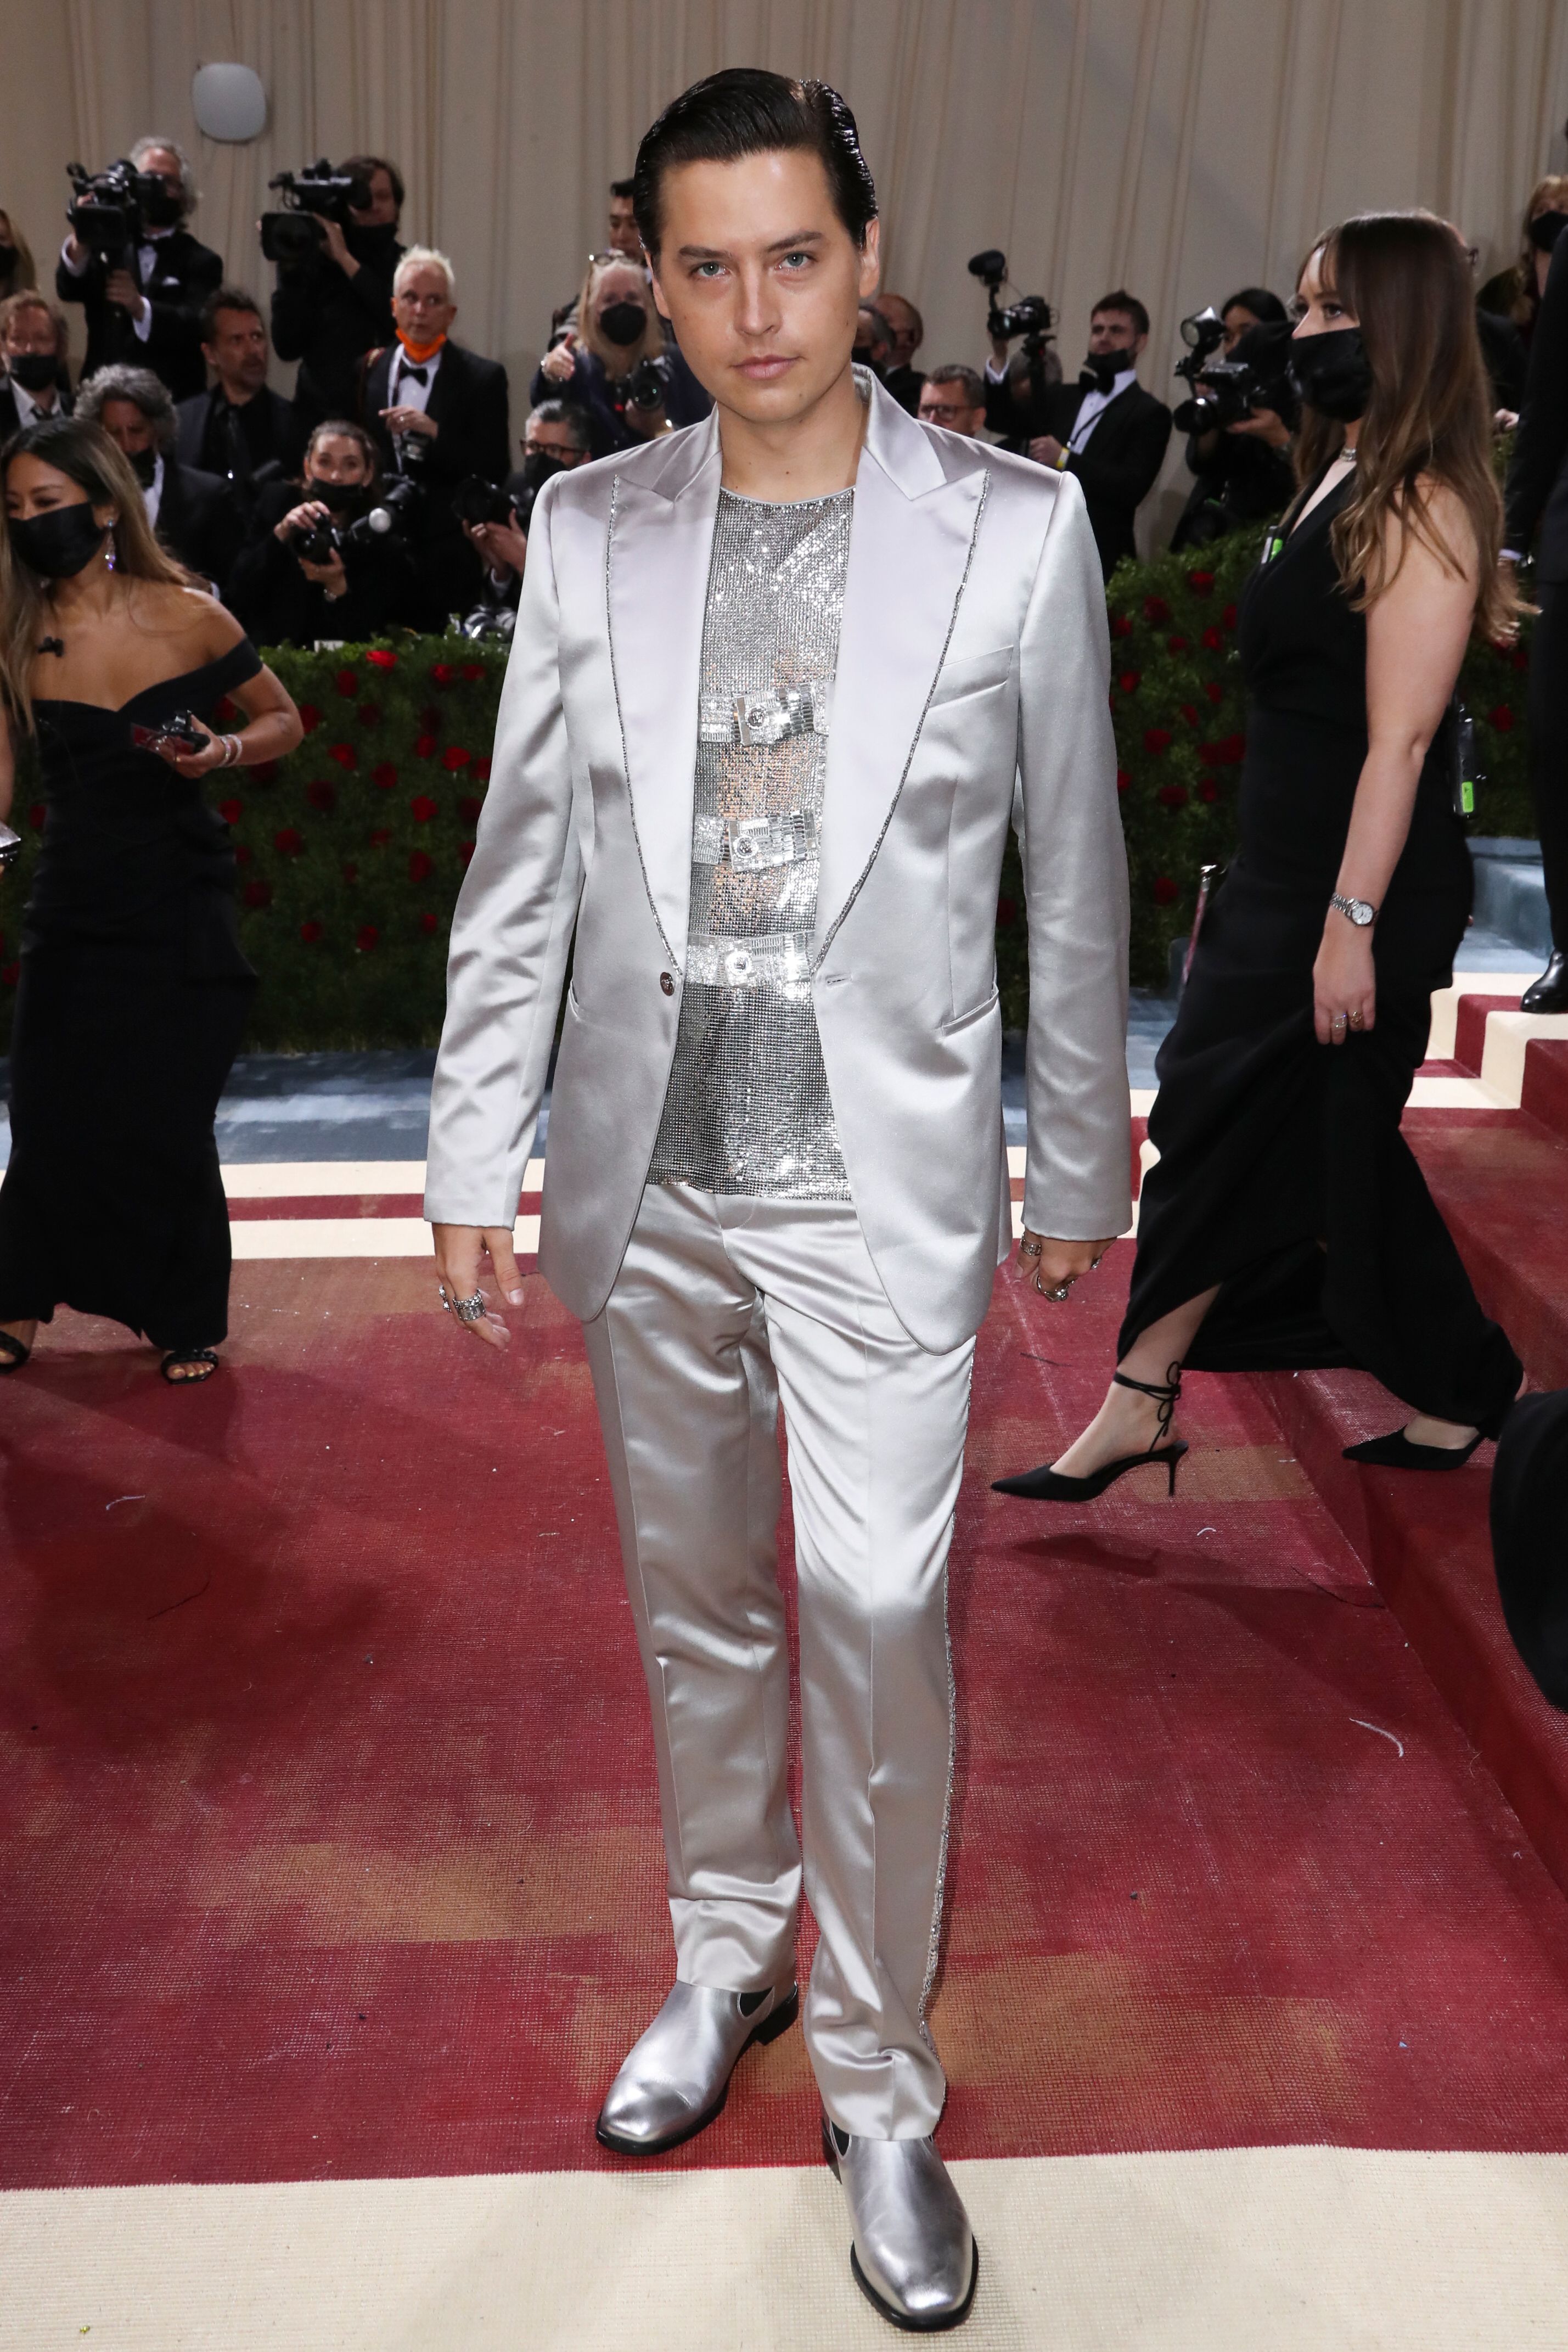 Young Hollywood Stars Made Their 2022 Met Gala Red Carpet Debut